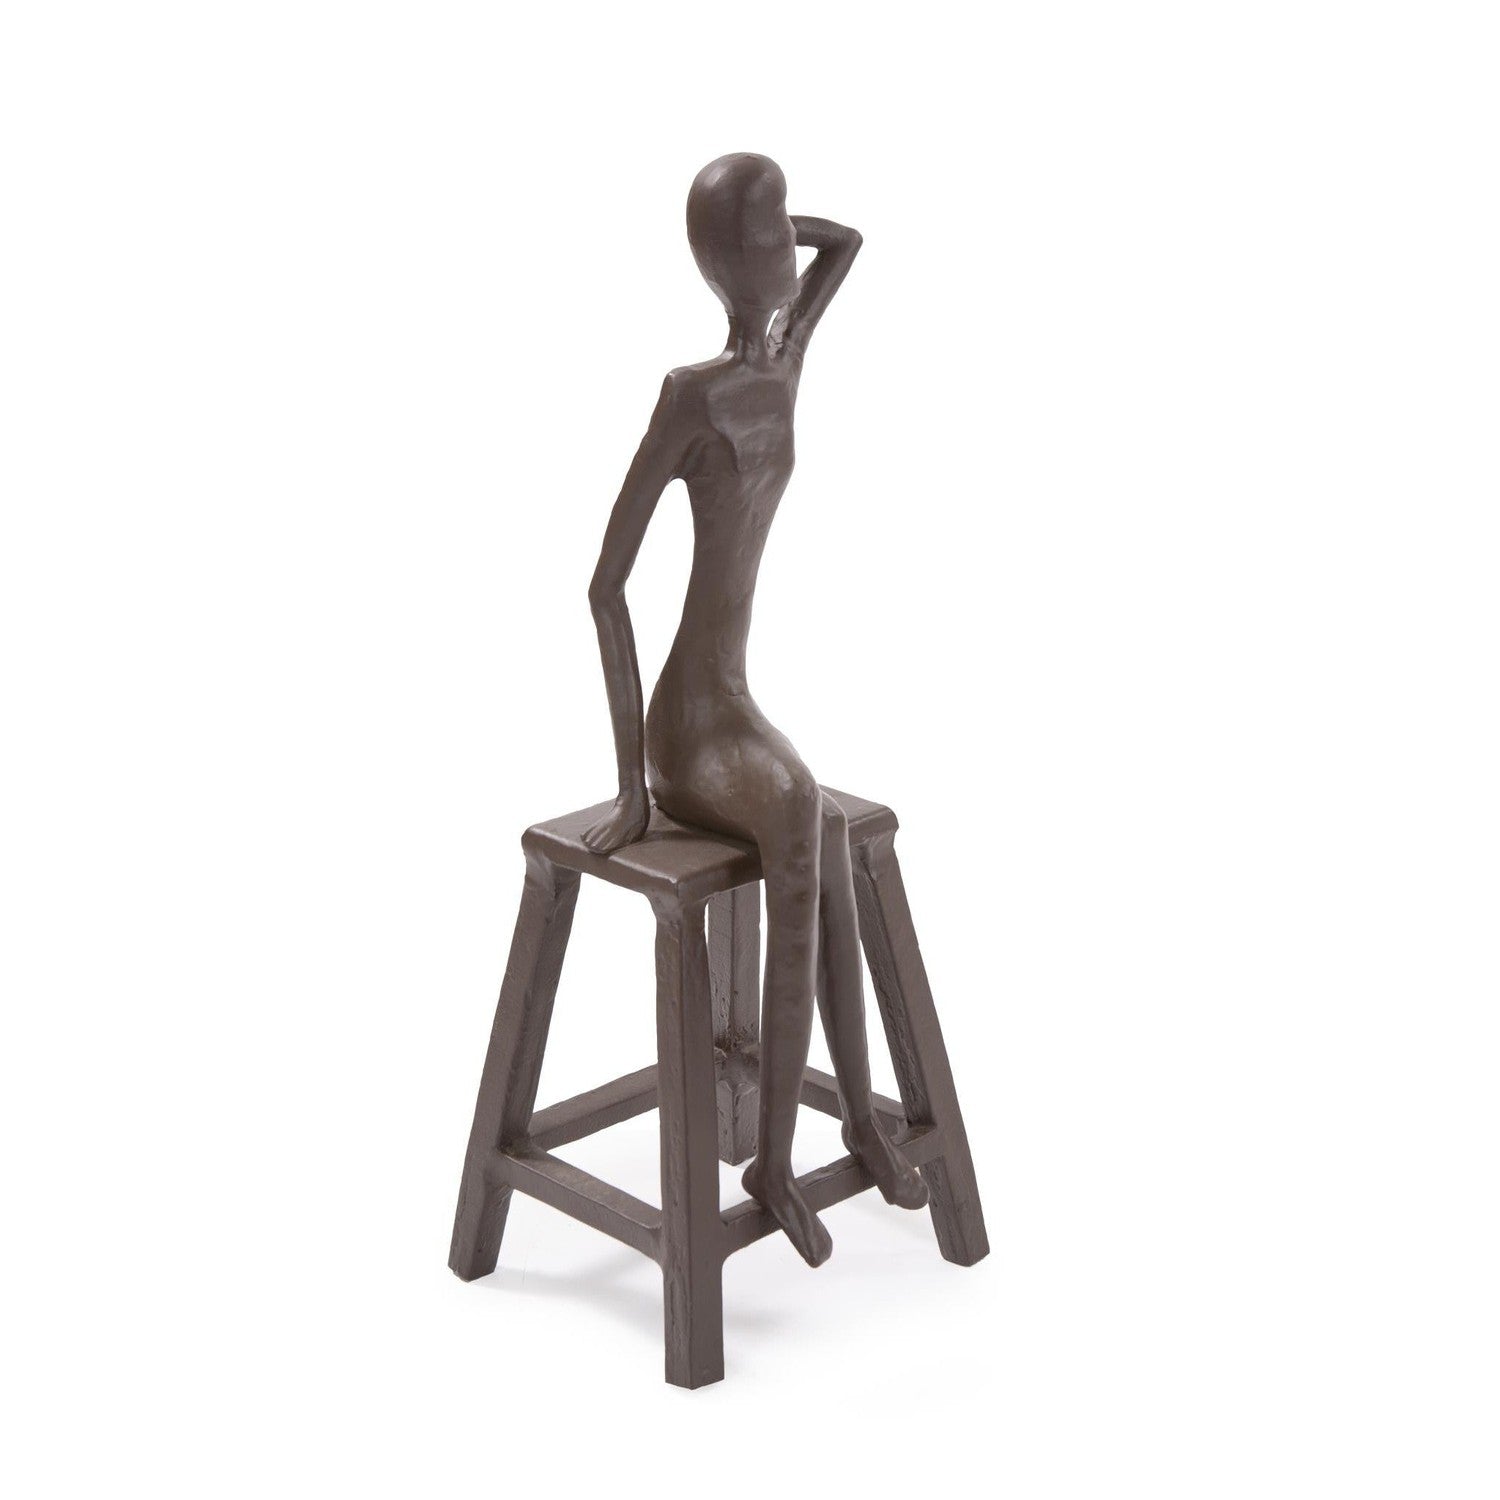 Sitting Beauty Aluminum Sculpture-The Howard Elliott Collection-HOWARD-51344-Decorative Objects-1-France and Son